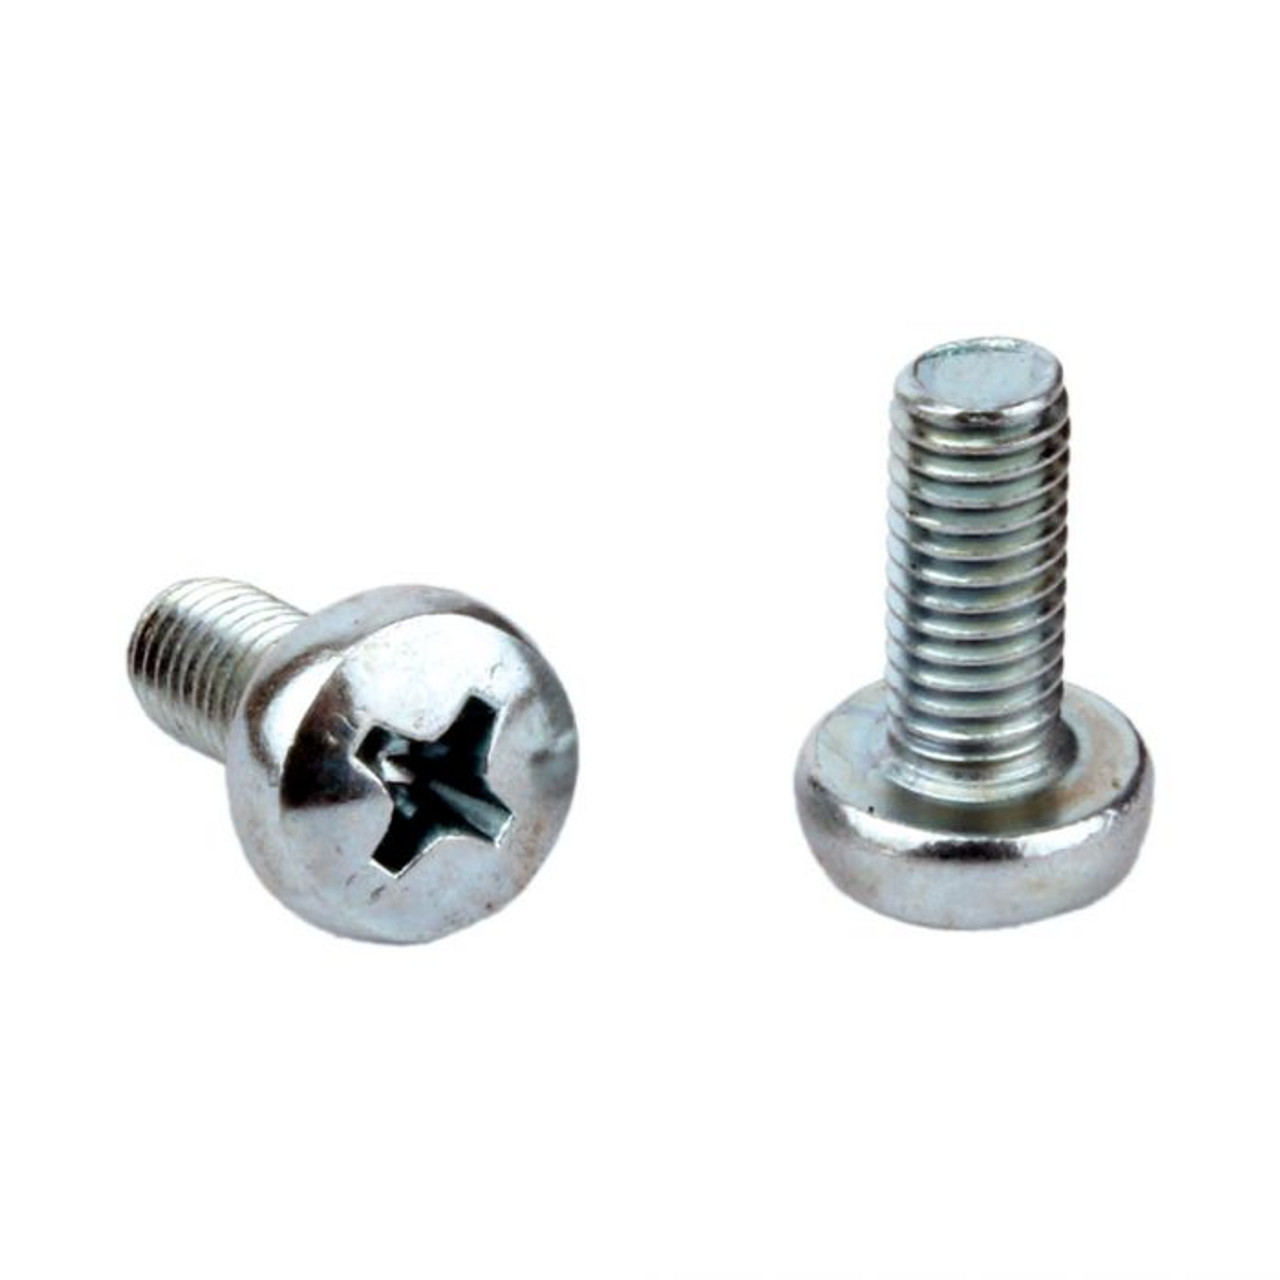 Anti-Theft Number Plate Bolts